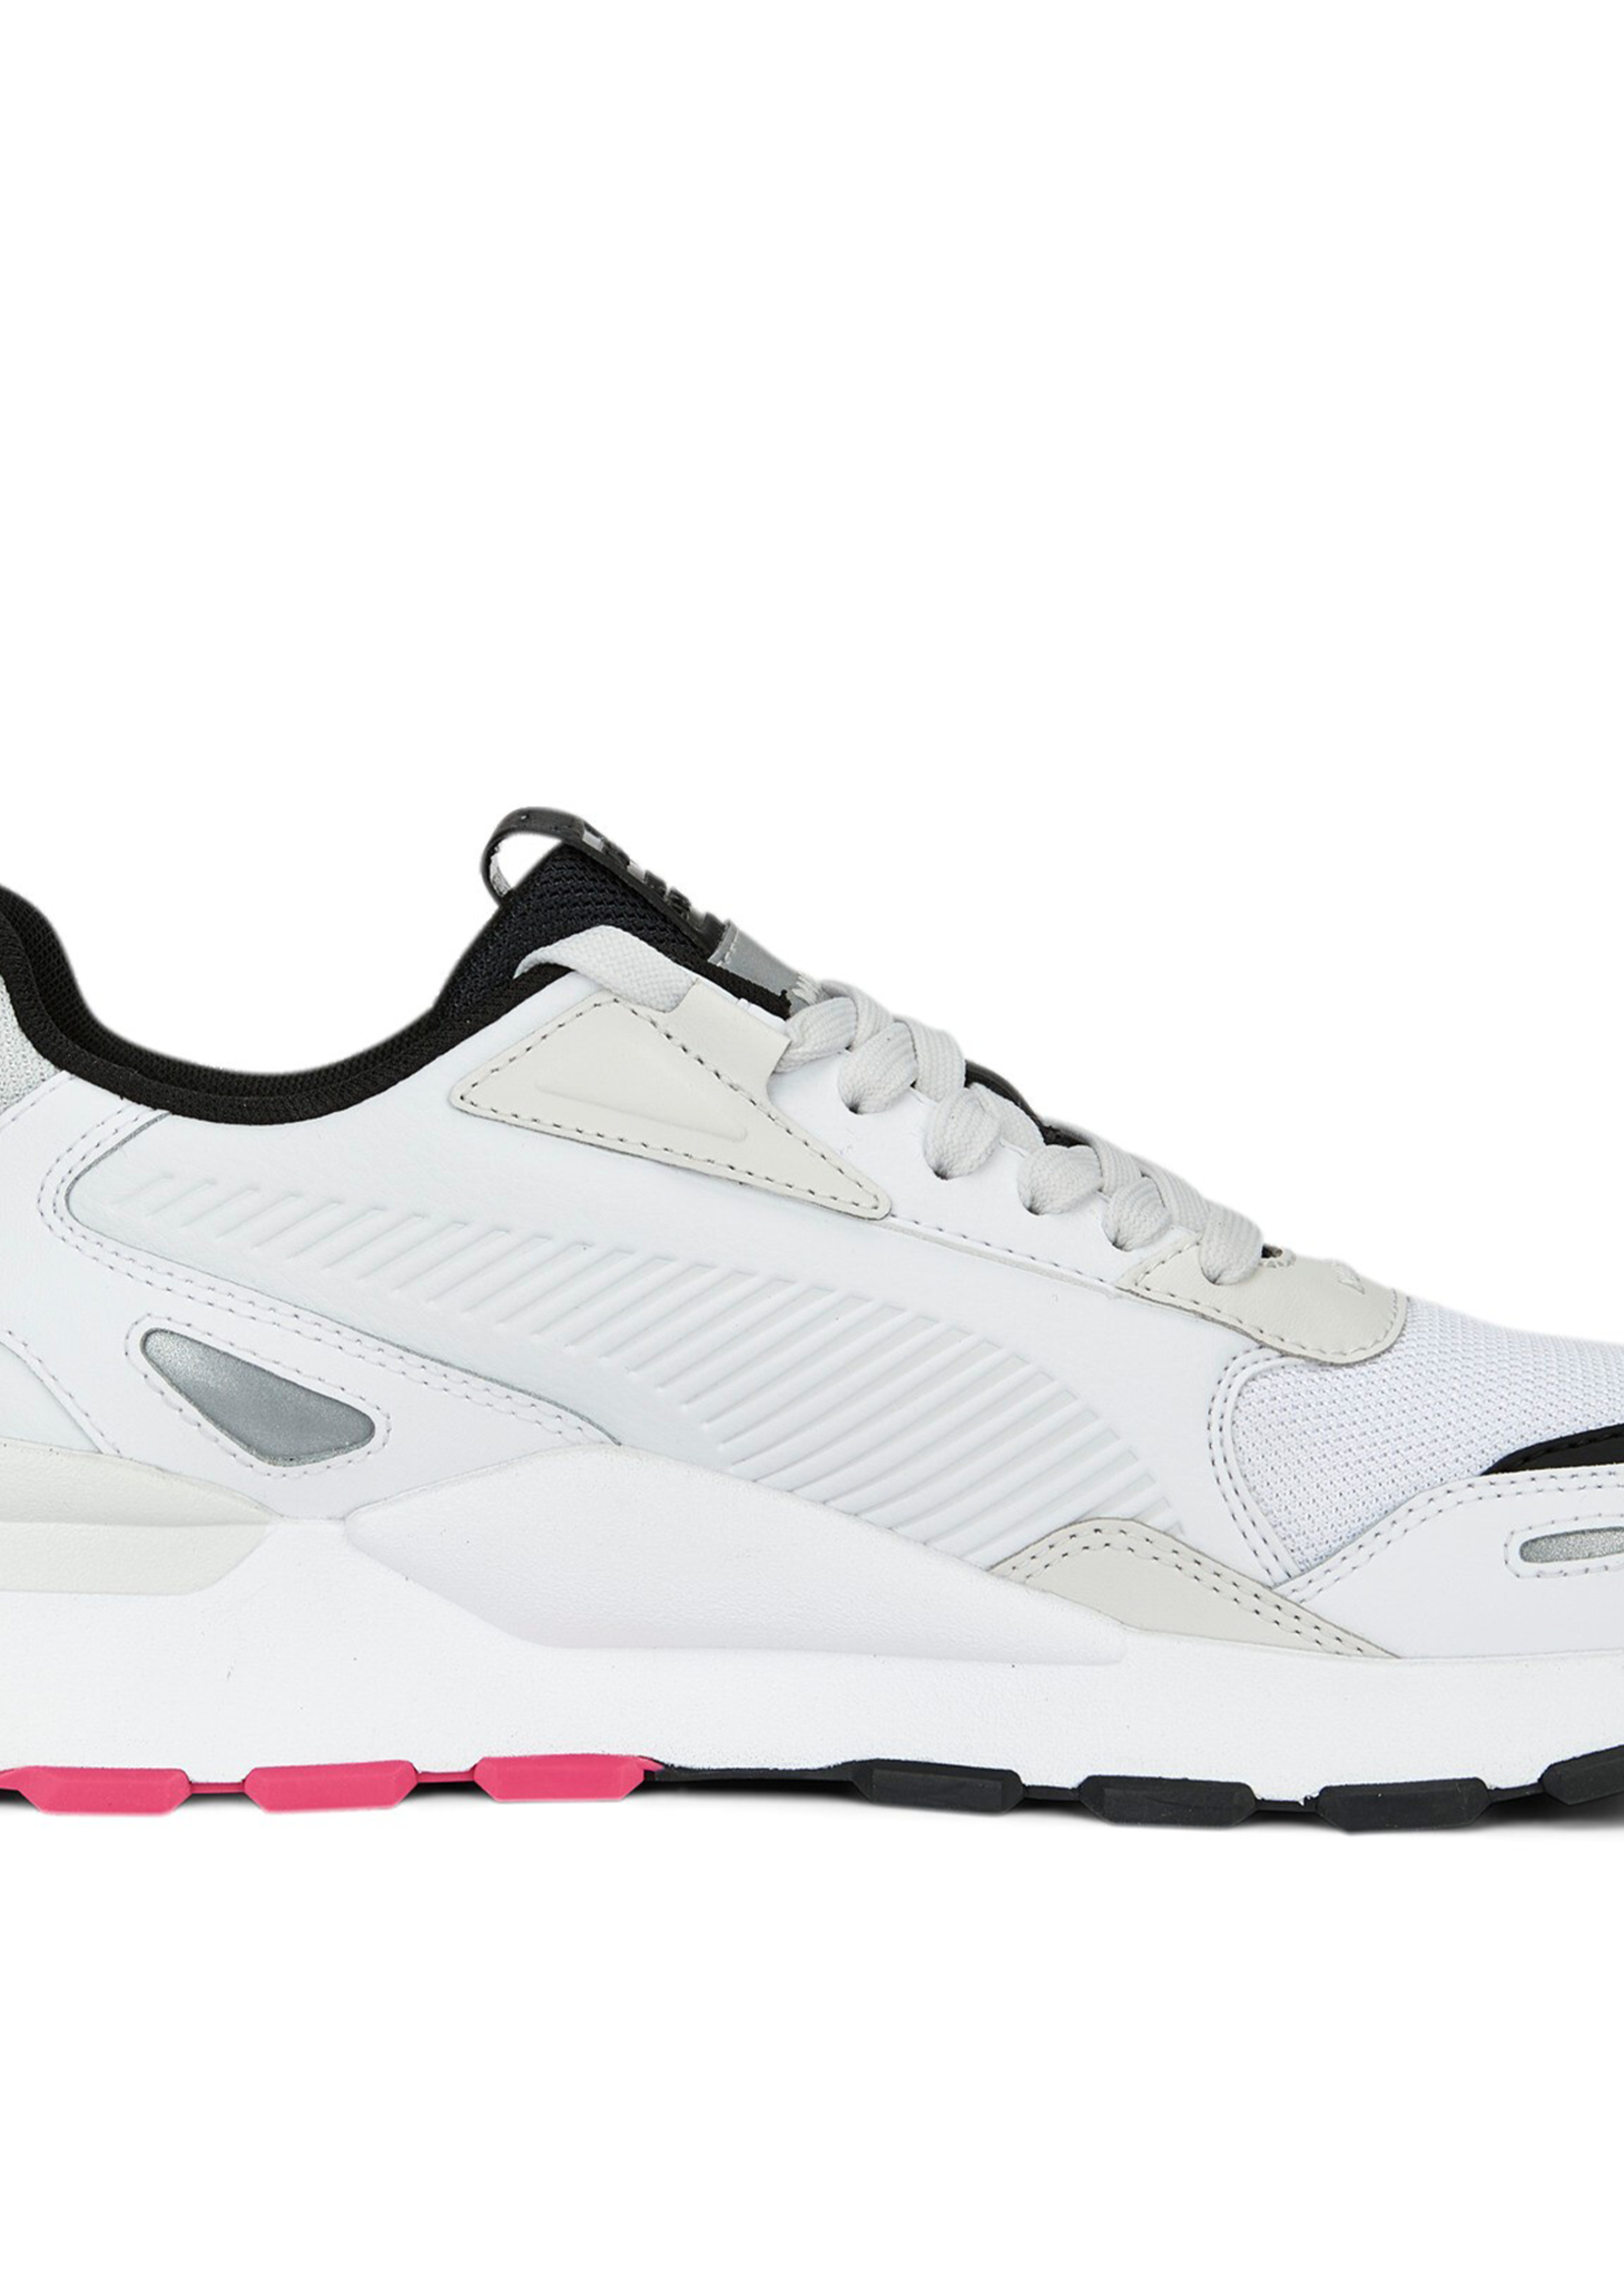 Puma Rs 3.0 Synth Pop White Pink